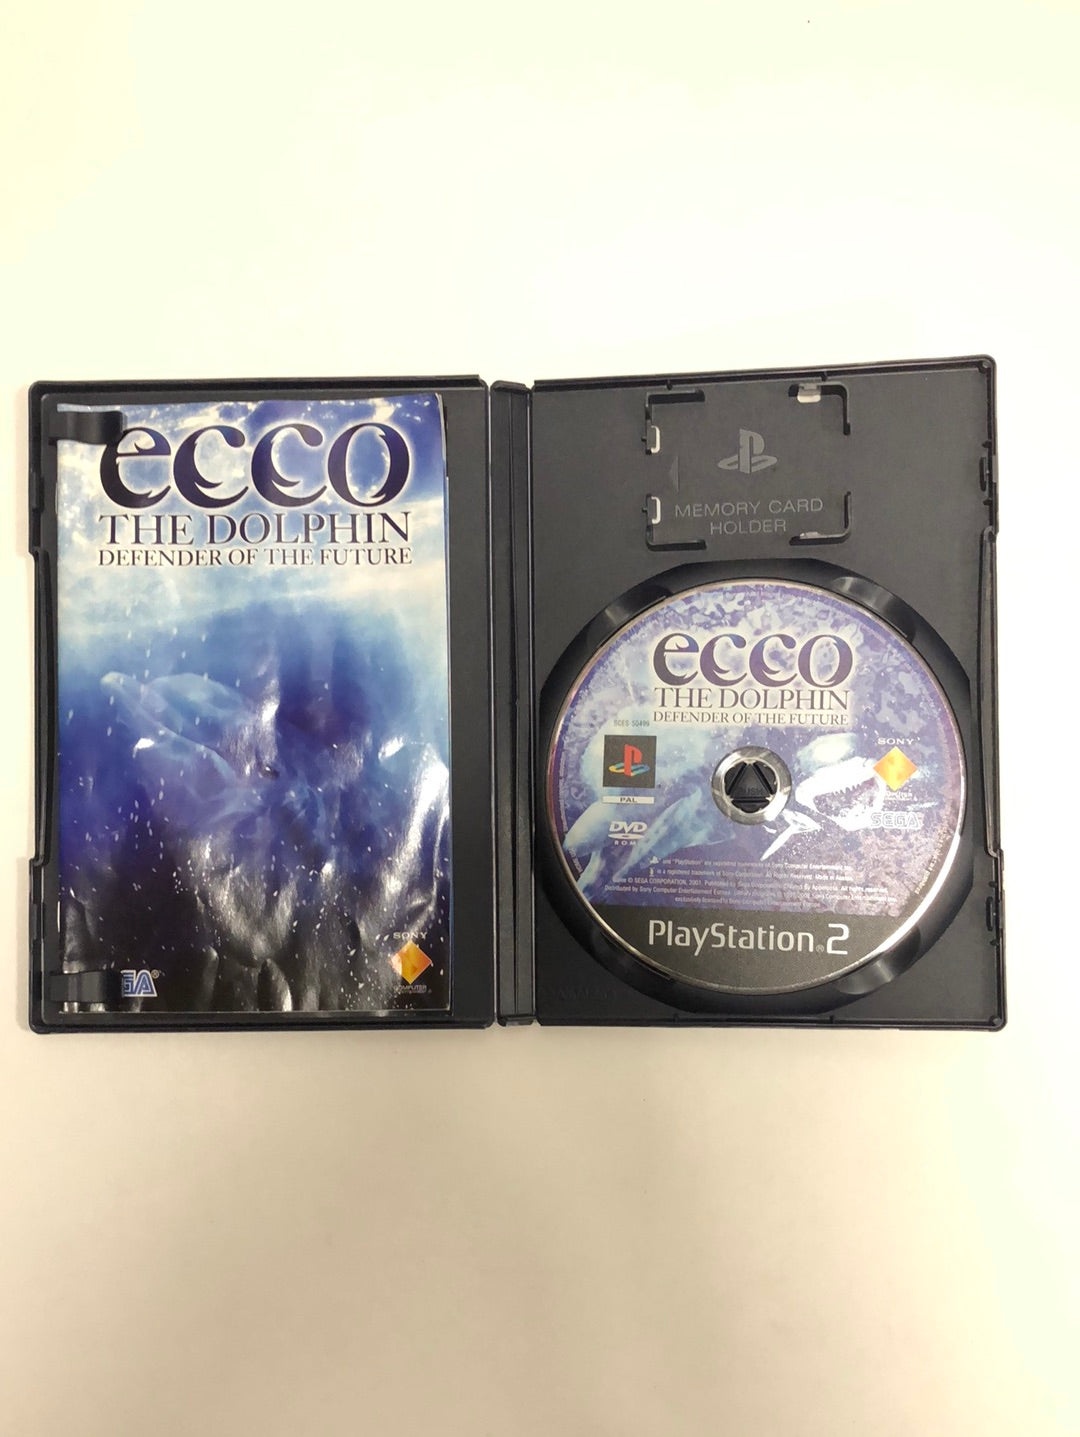 Ecco the dolphin defender of the future sony PAL ps2 avec notice